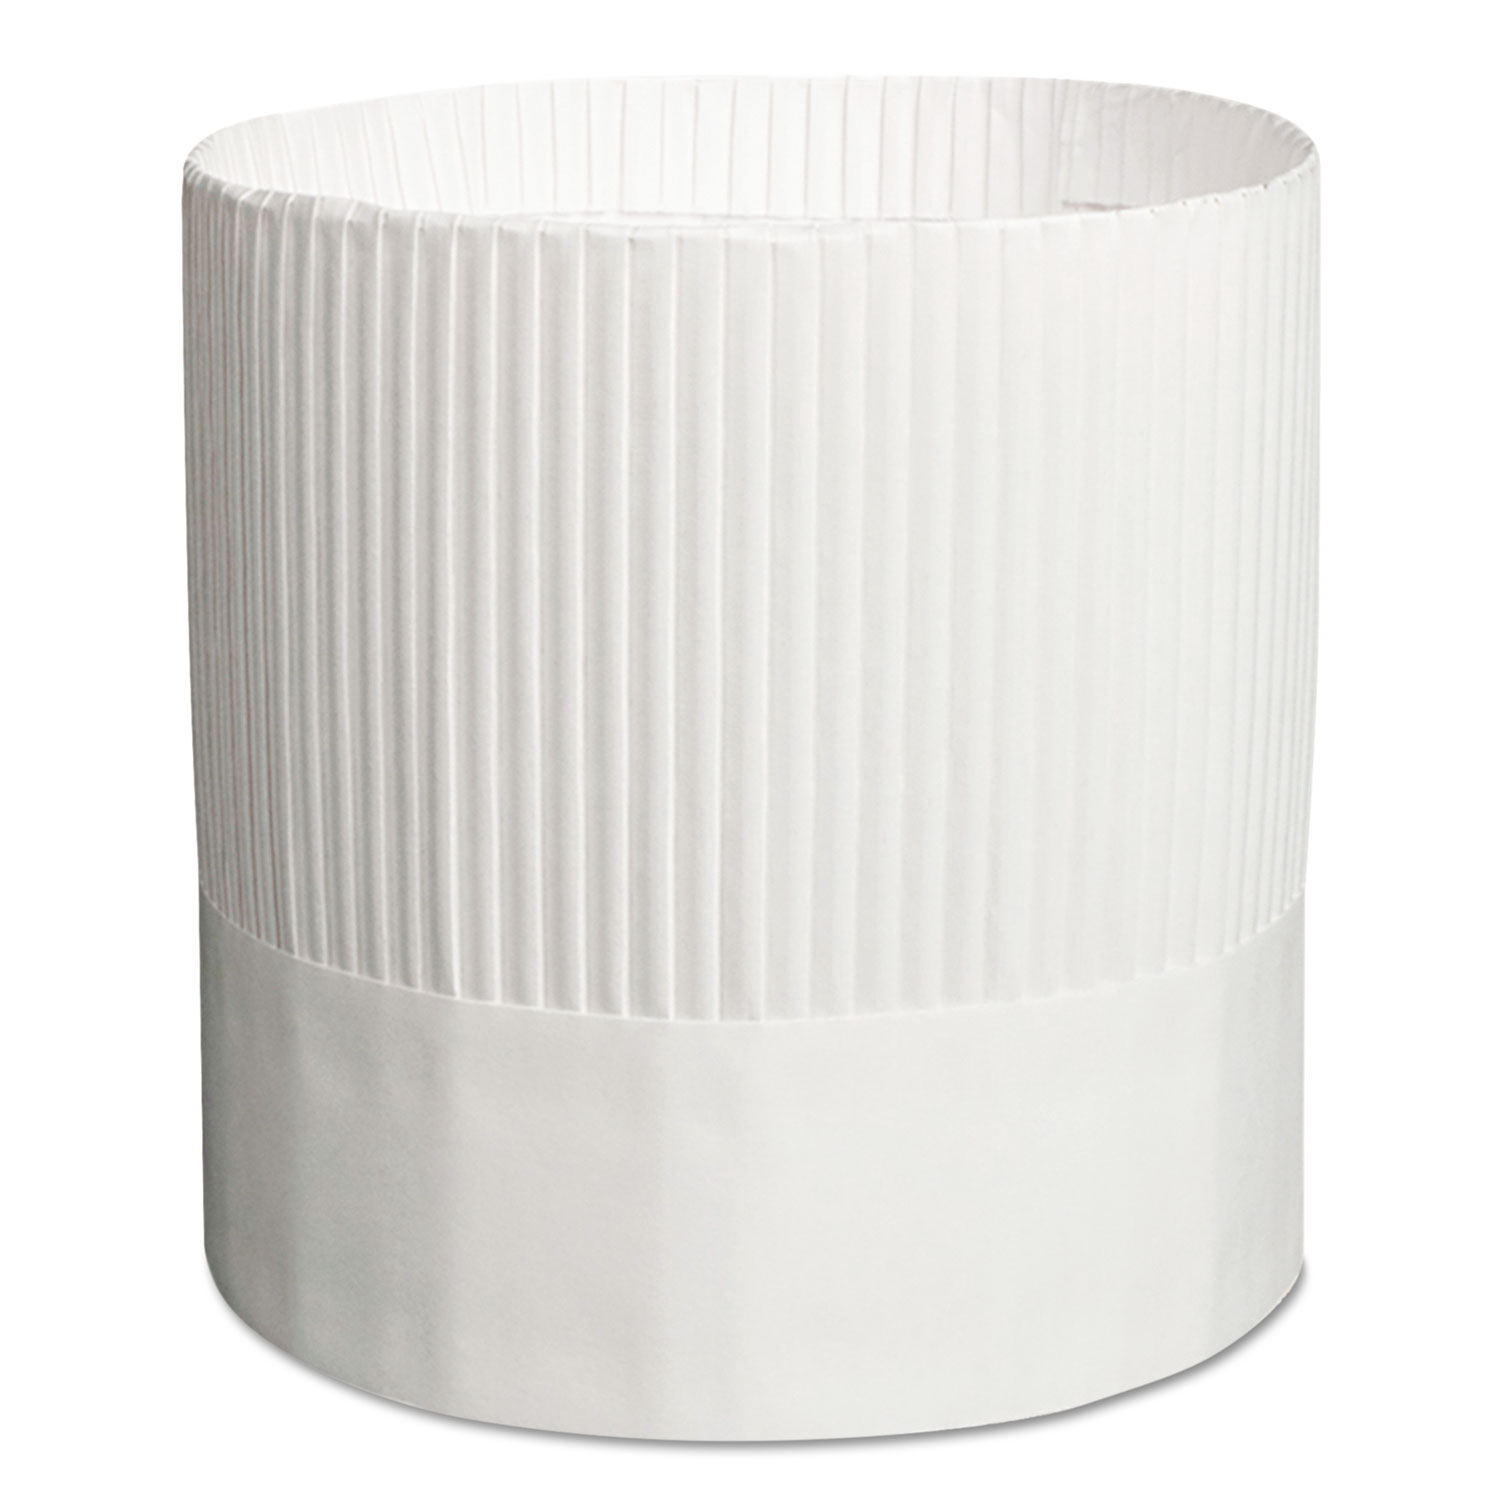 Stirling Fluted Chefs Hats, Paper, White, Adjustable, 7 in. Tall, 15/Carton